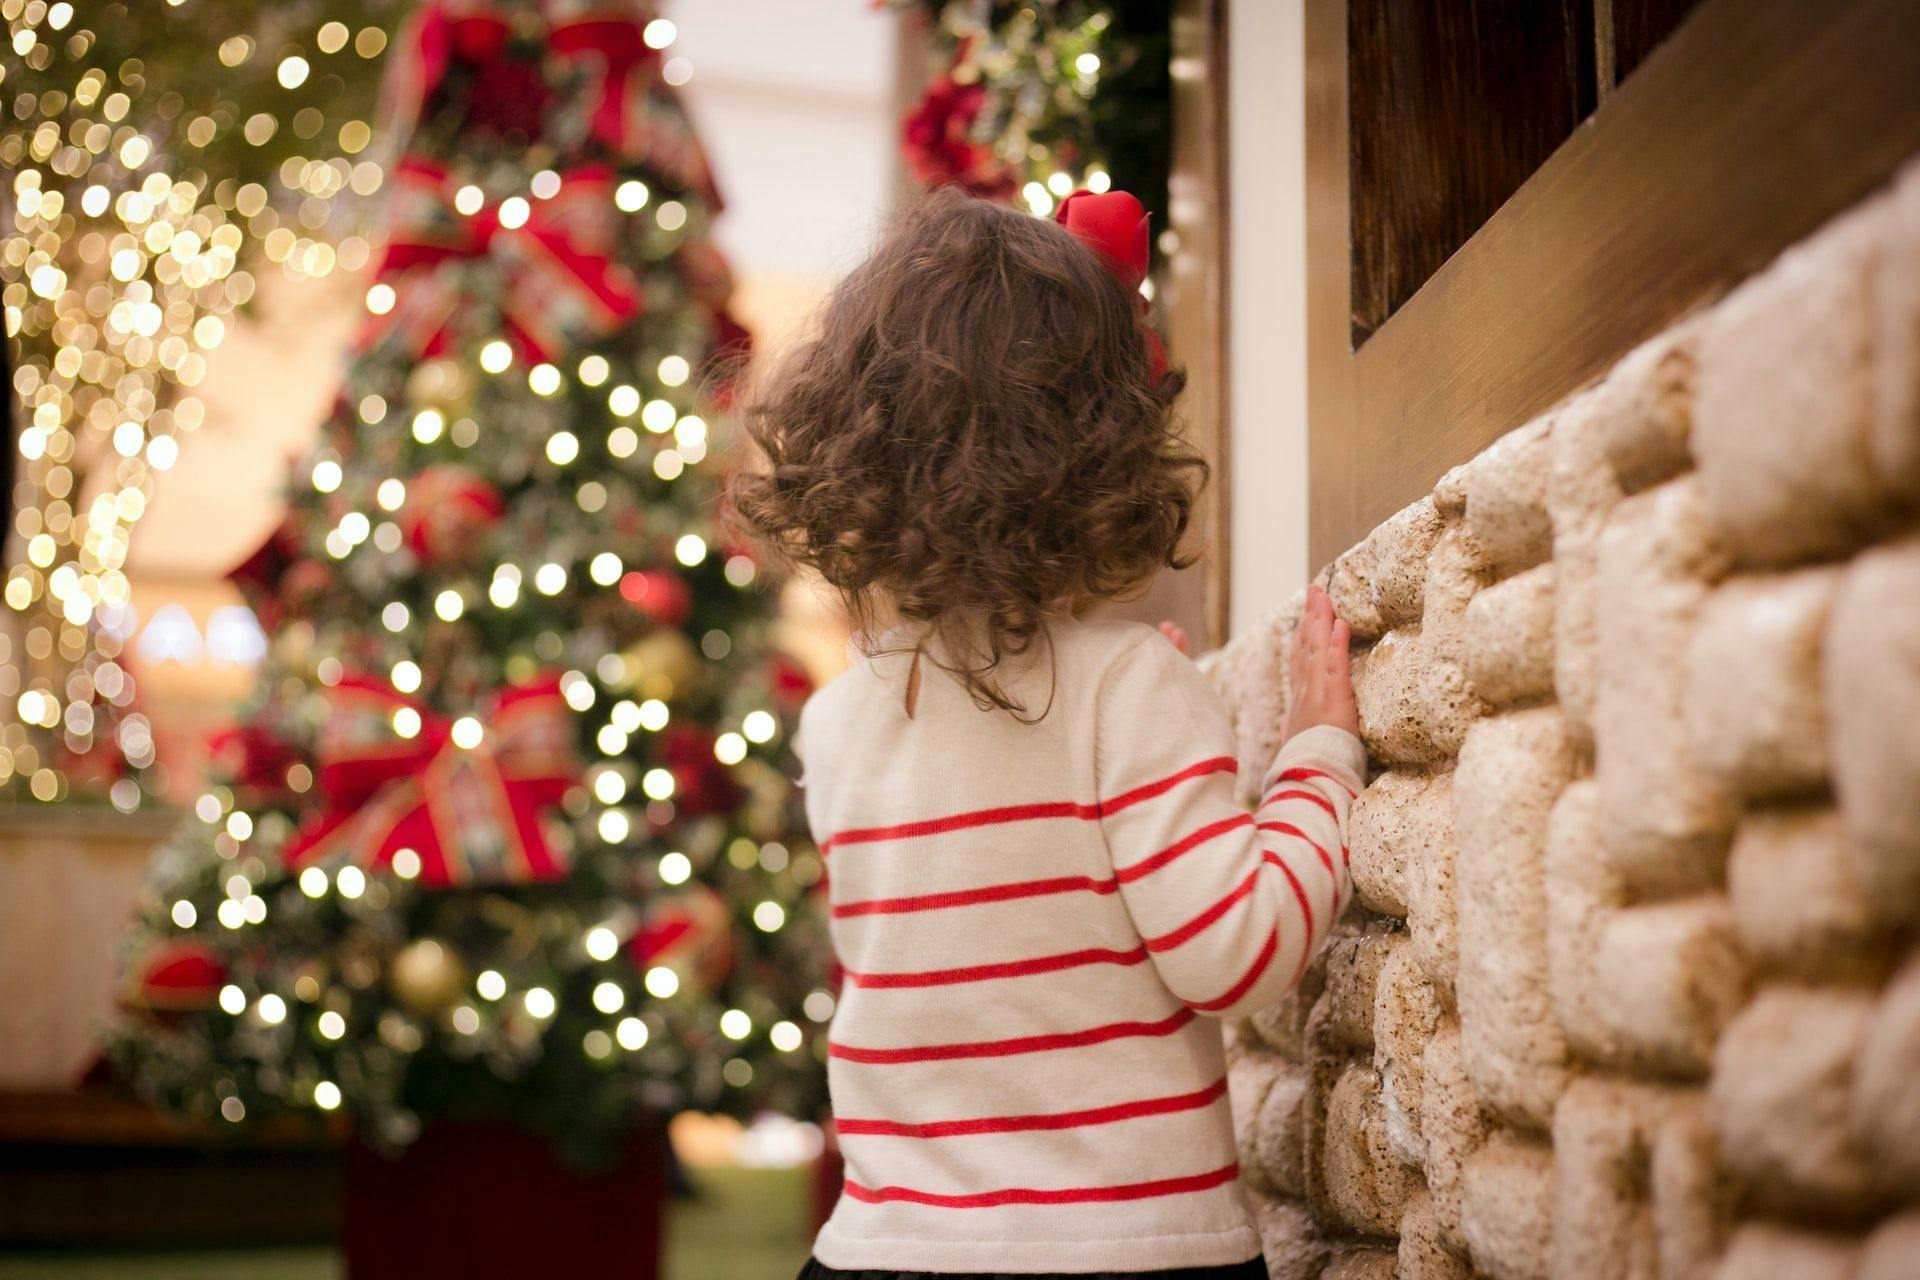 Children»s Christmas market opens in Luxembourg